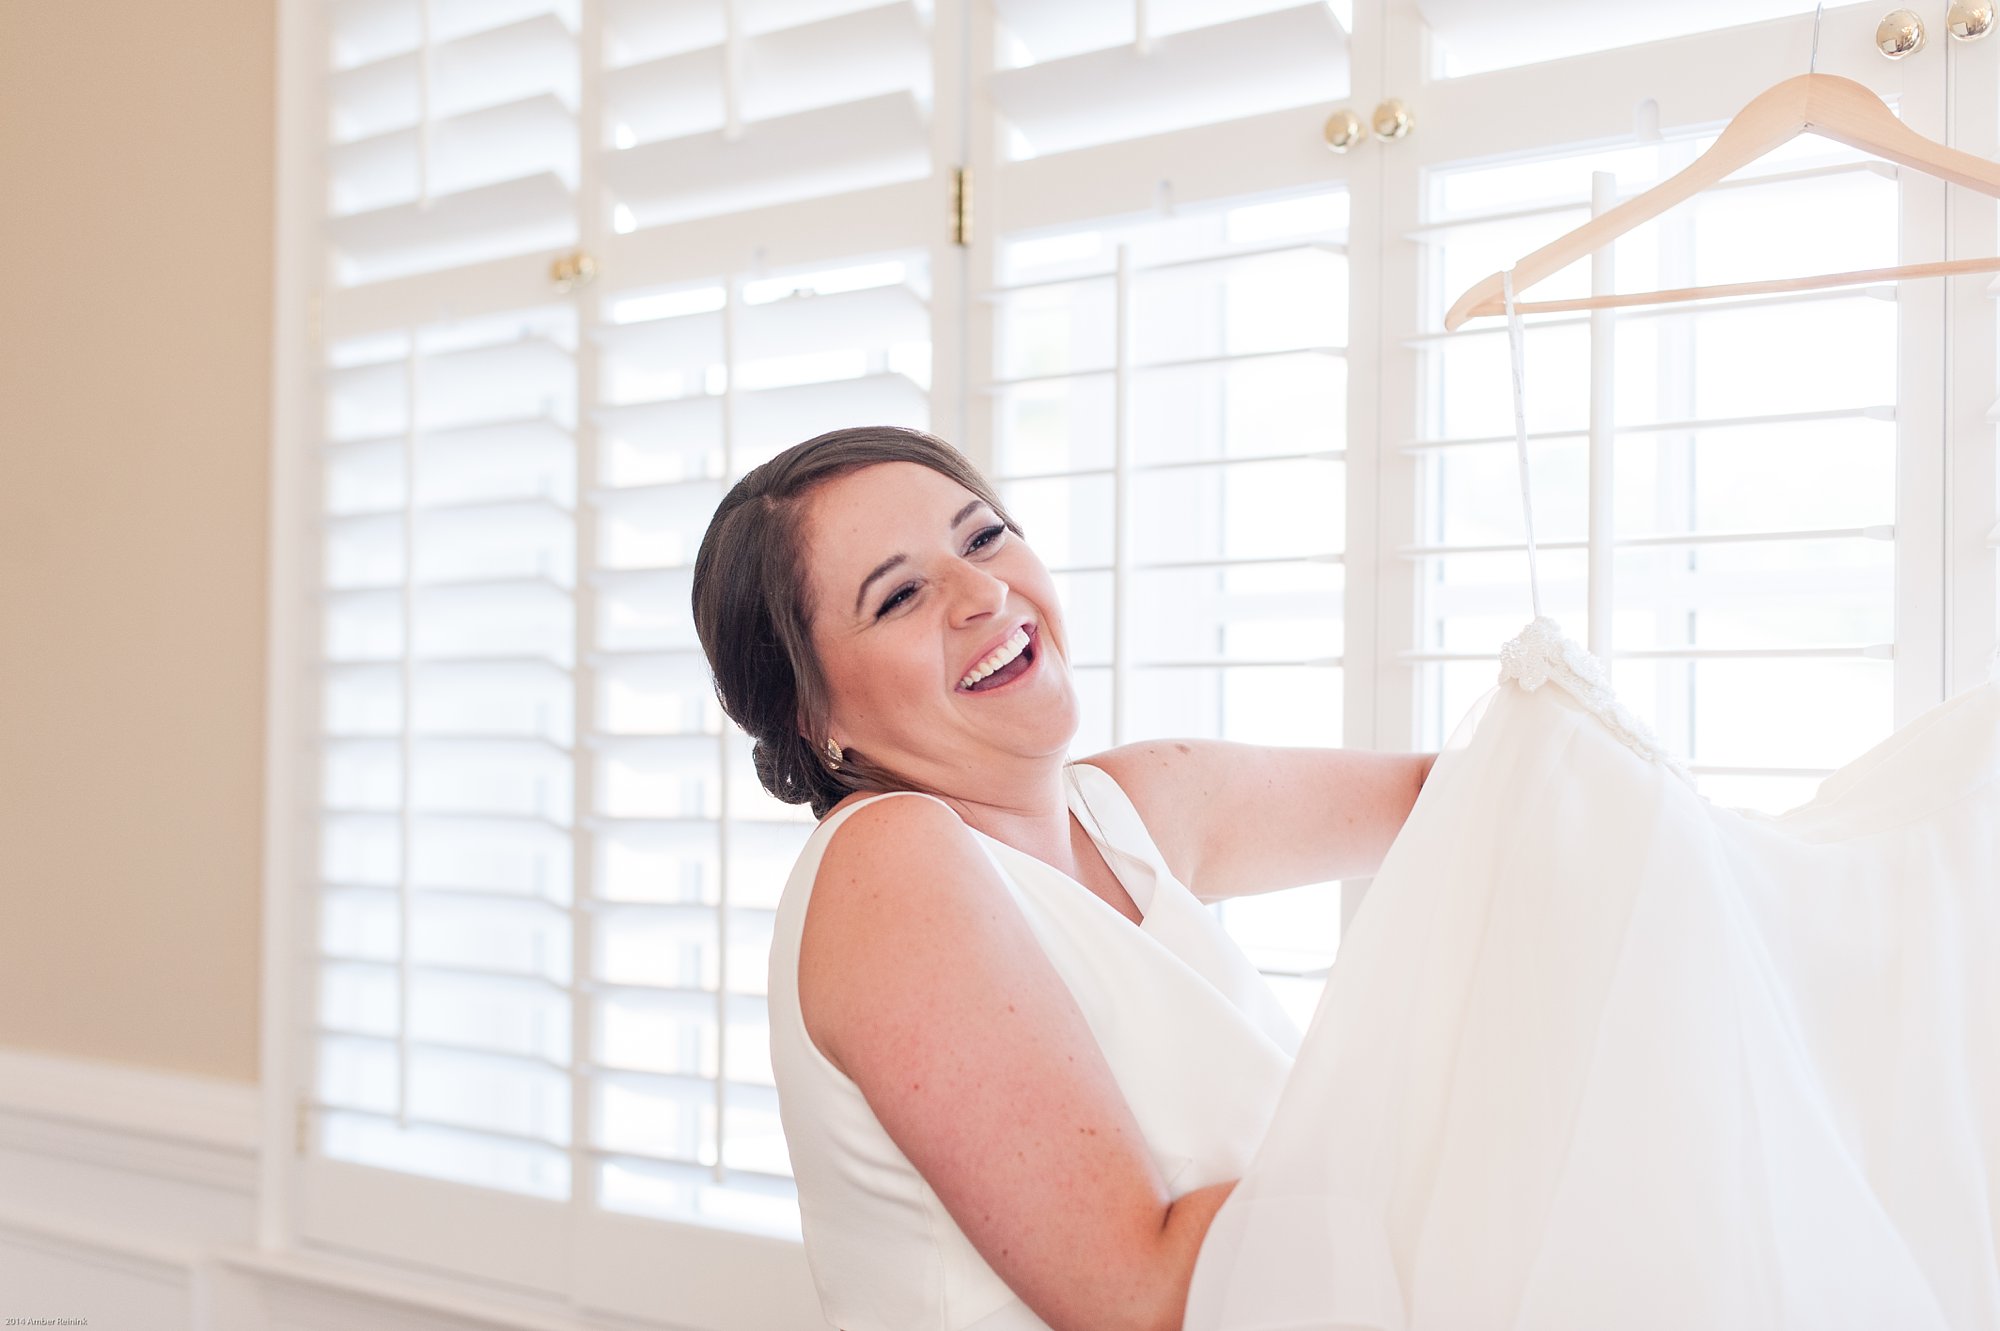 Bride getting ready at fauquier springs country club wedding amber kay photography